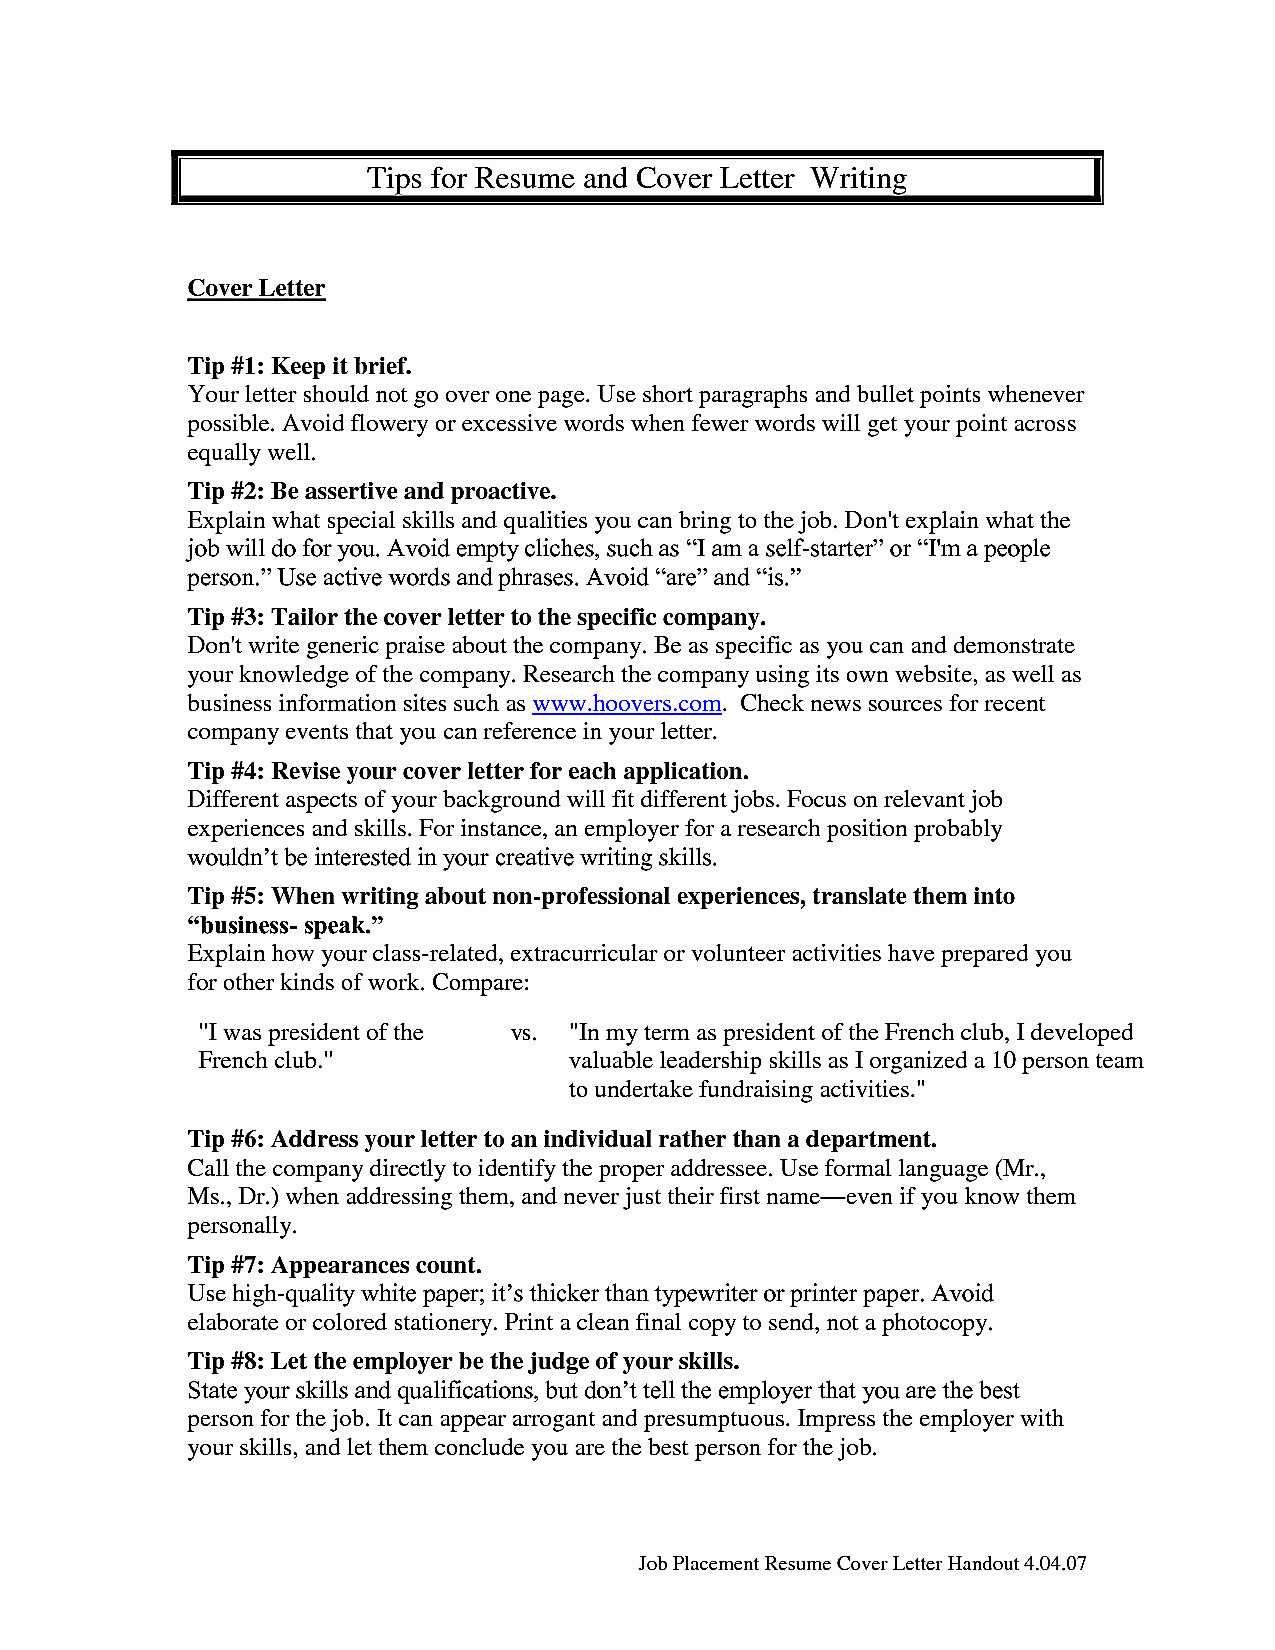 Huck's Adventures Worksheet Answers Along with Letter Example